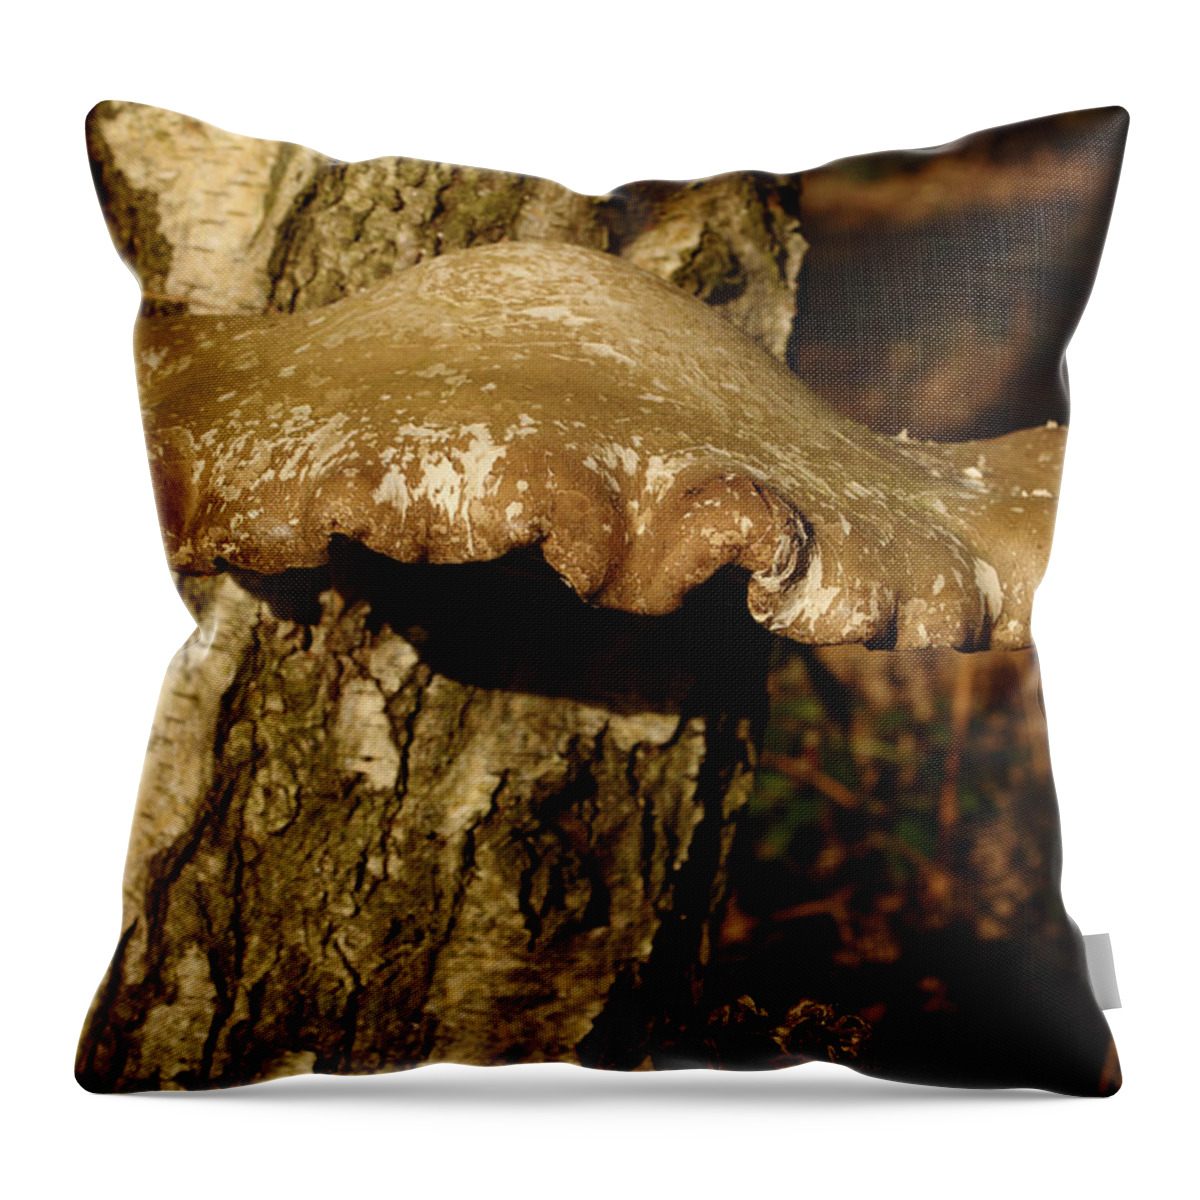 Fungi Throw Pillow featuring the photograph Fungus On Silver Birch by Adrian Wale